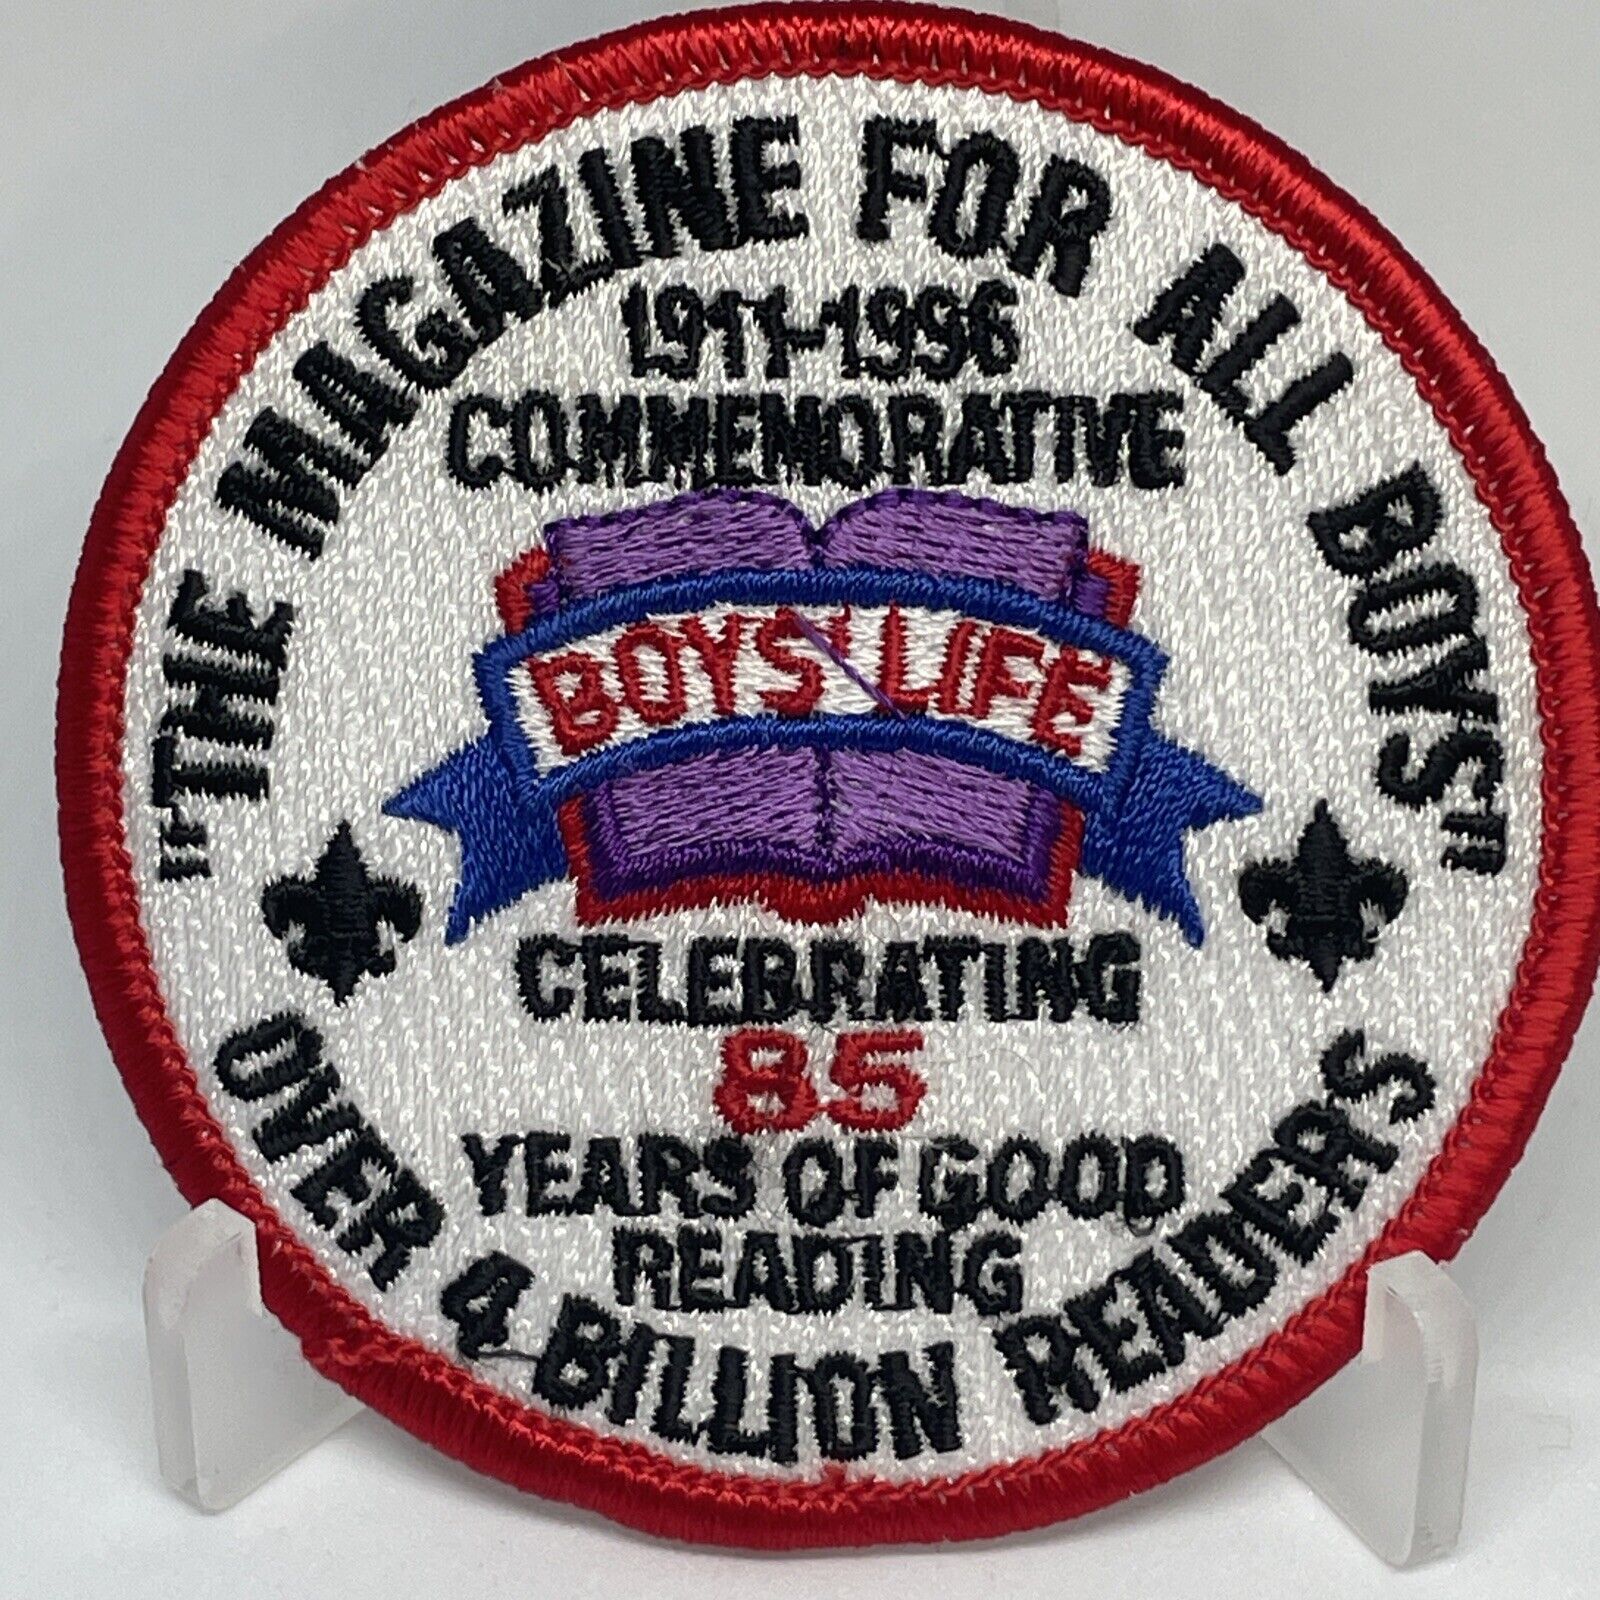 Boys Life Patch 1996 Celebrationg 85 Years of Good Reading Boys Life Boy ScoutsP